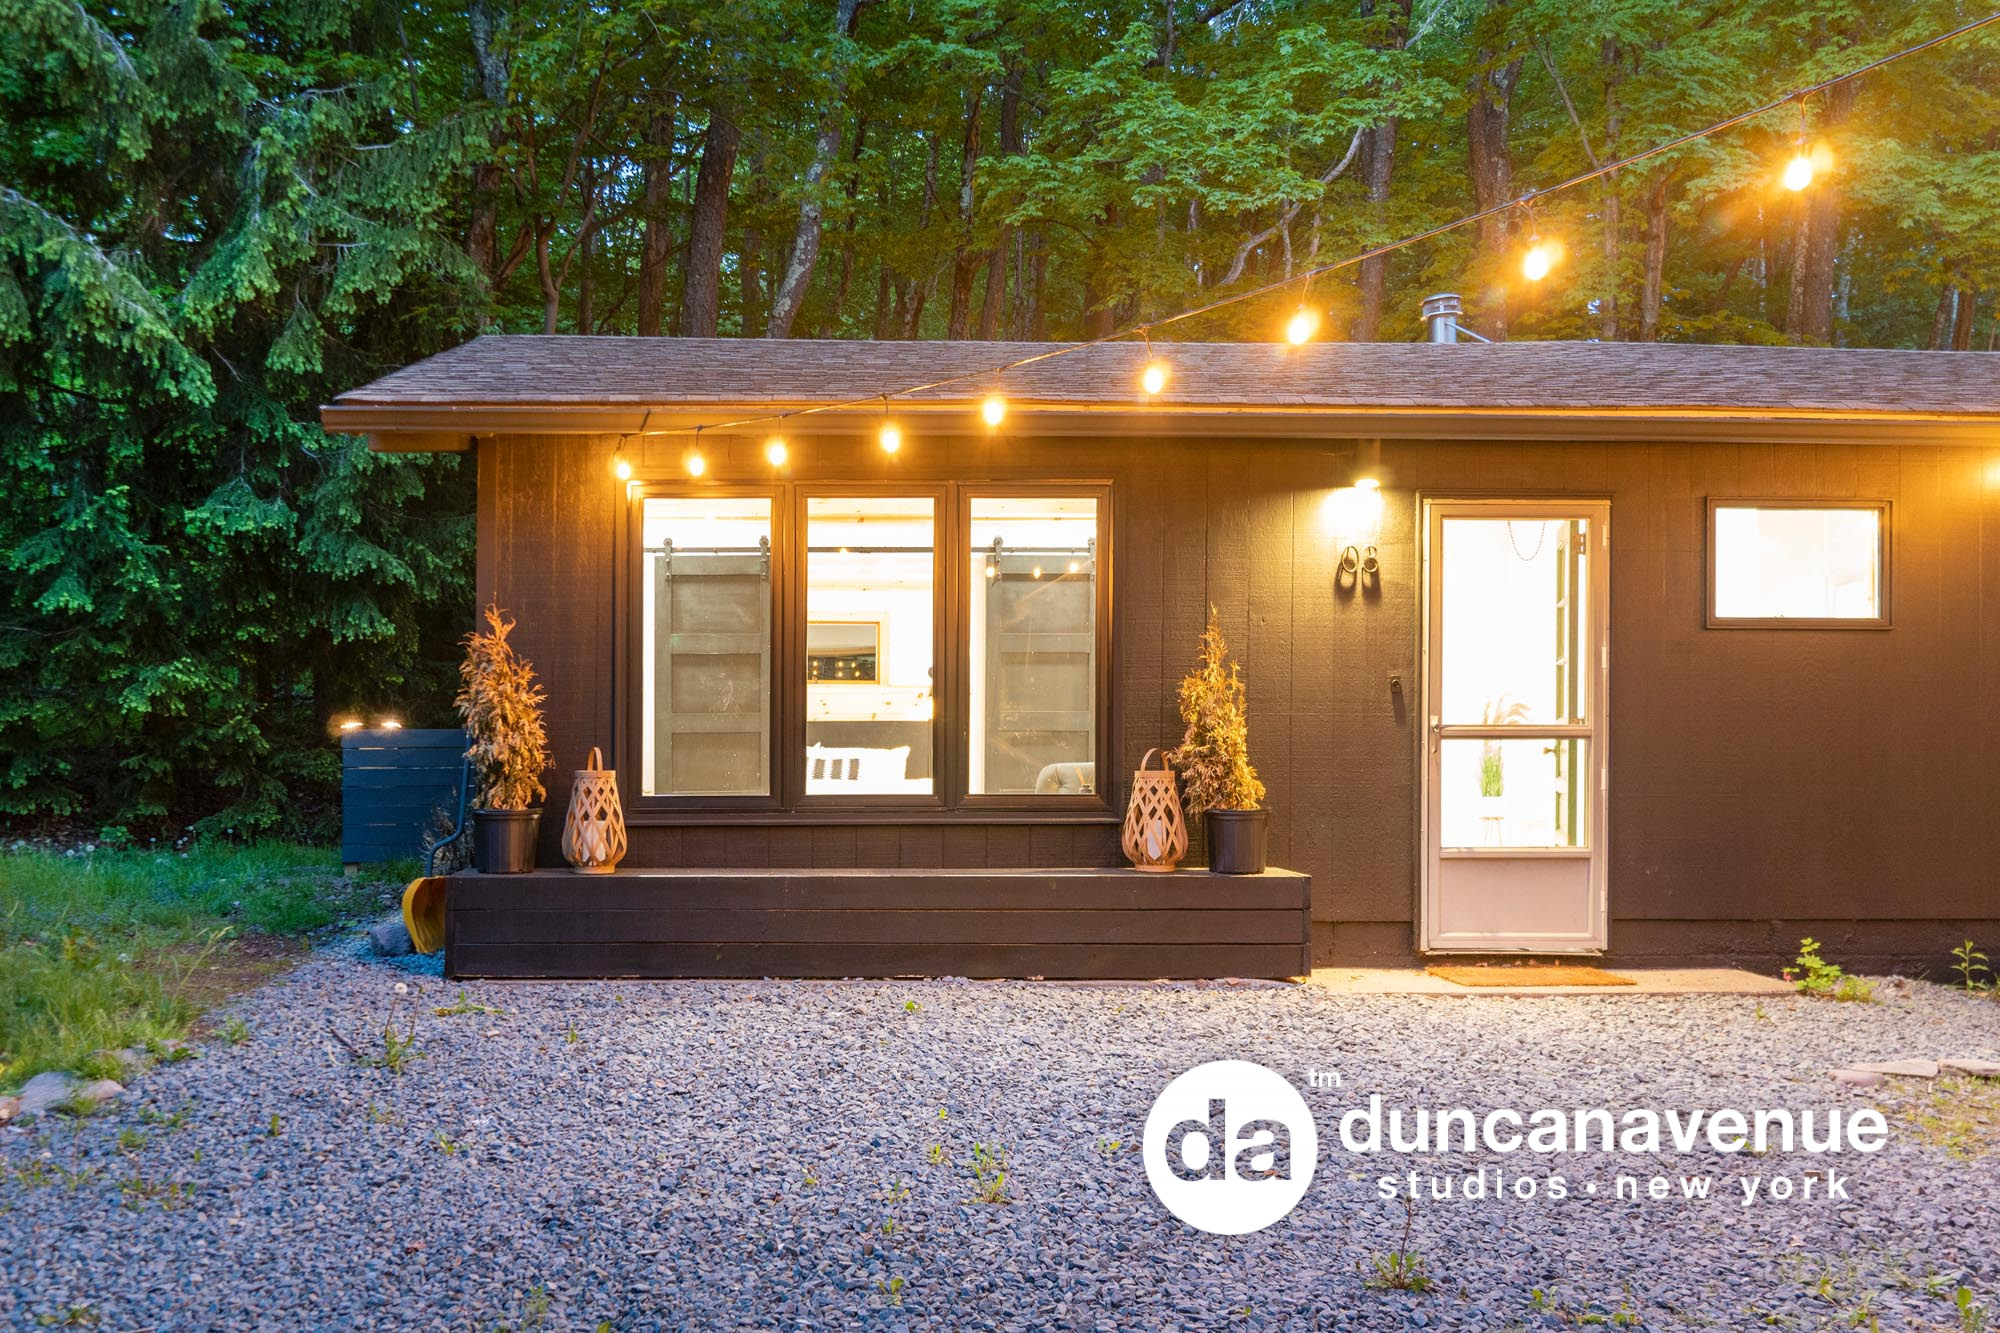 Modern Rustic Cabin in the Catskill Mountains – The Best Airbnb Photography in the Hudson Valley and Upstate, NY – Duncan Avenue Studios – Alluvion Media